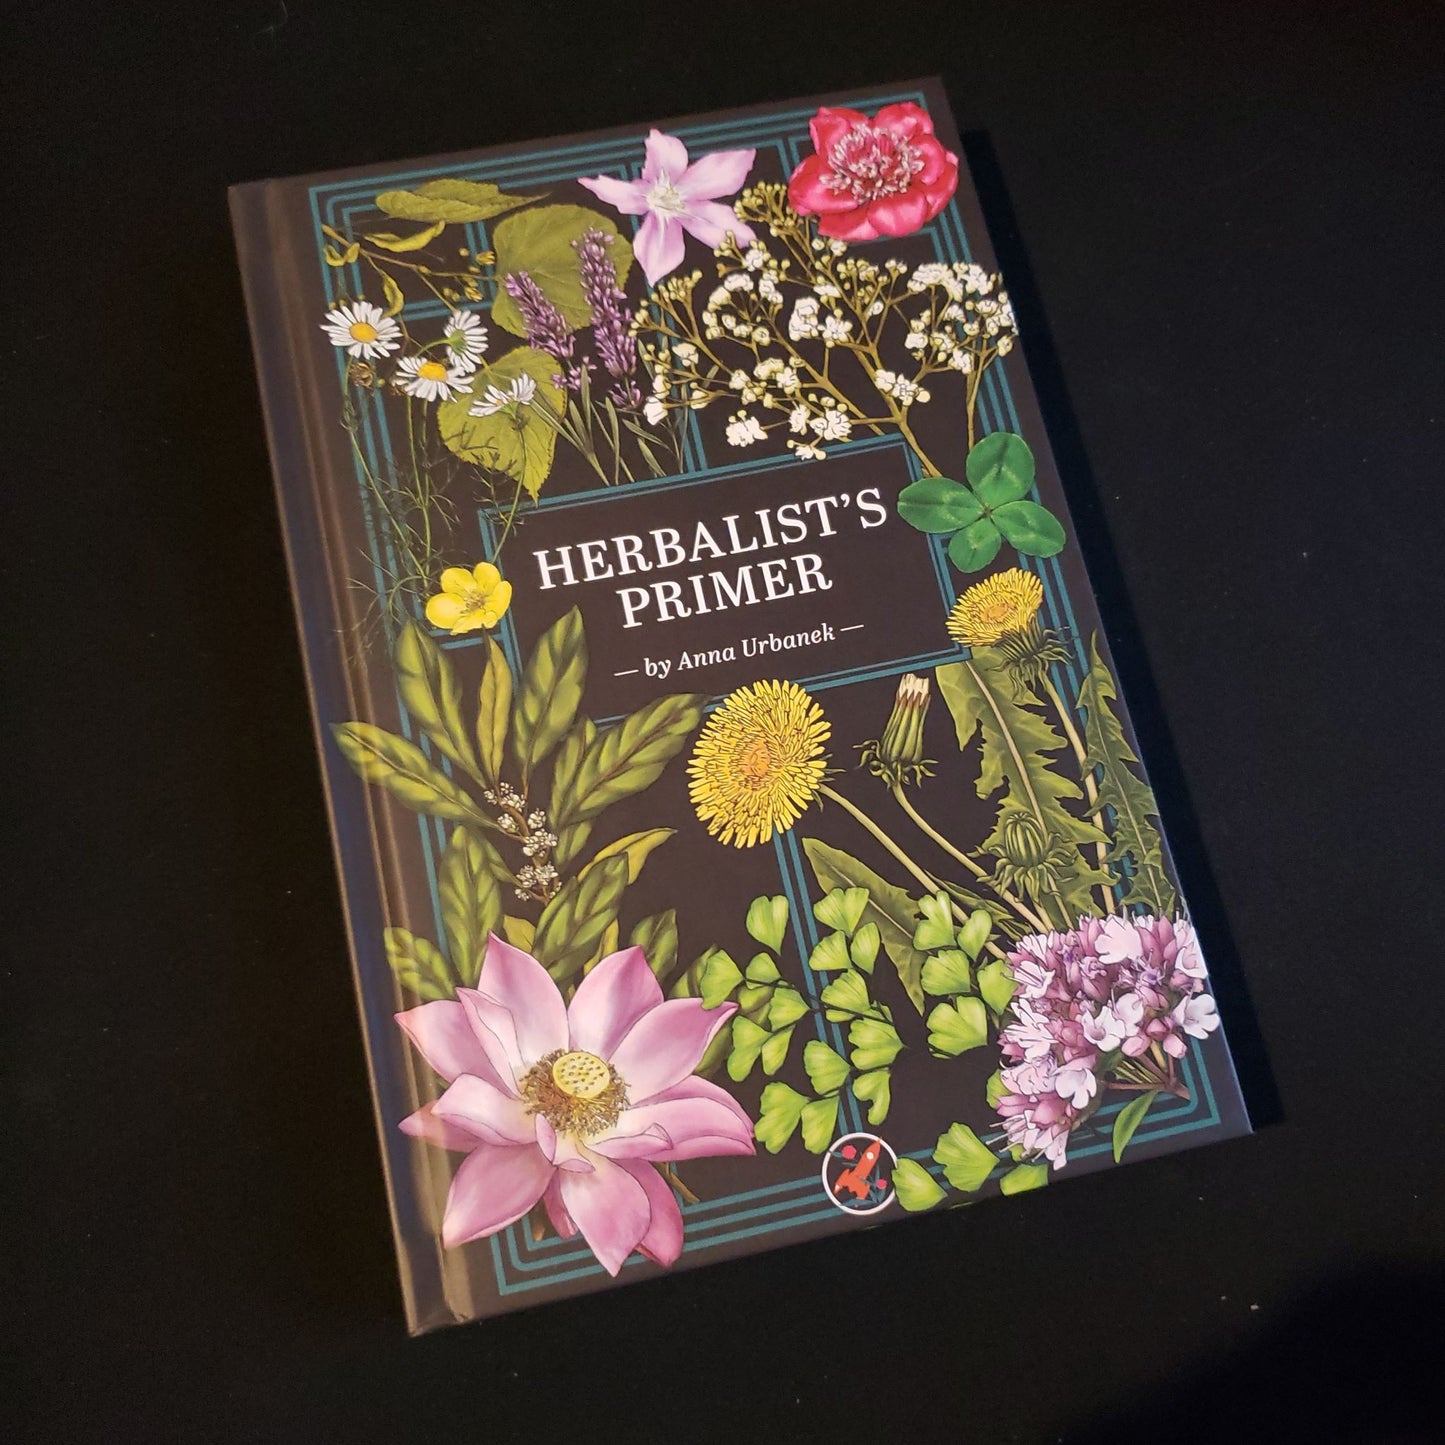 Image shows the front cover of the Herbalist's Primer roleplaying game book